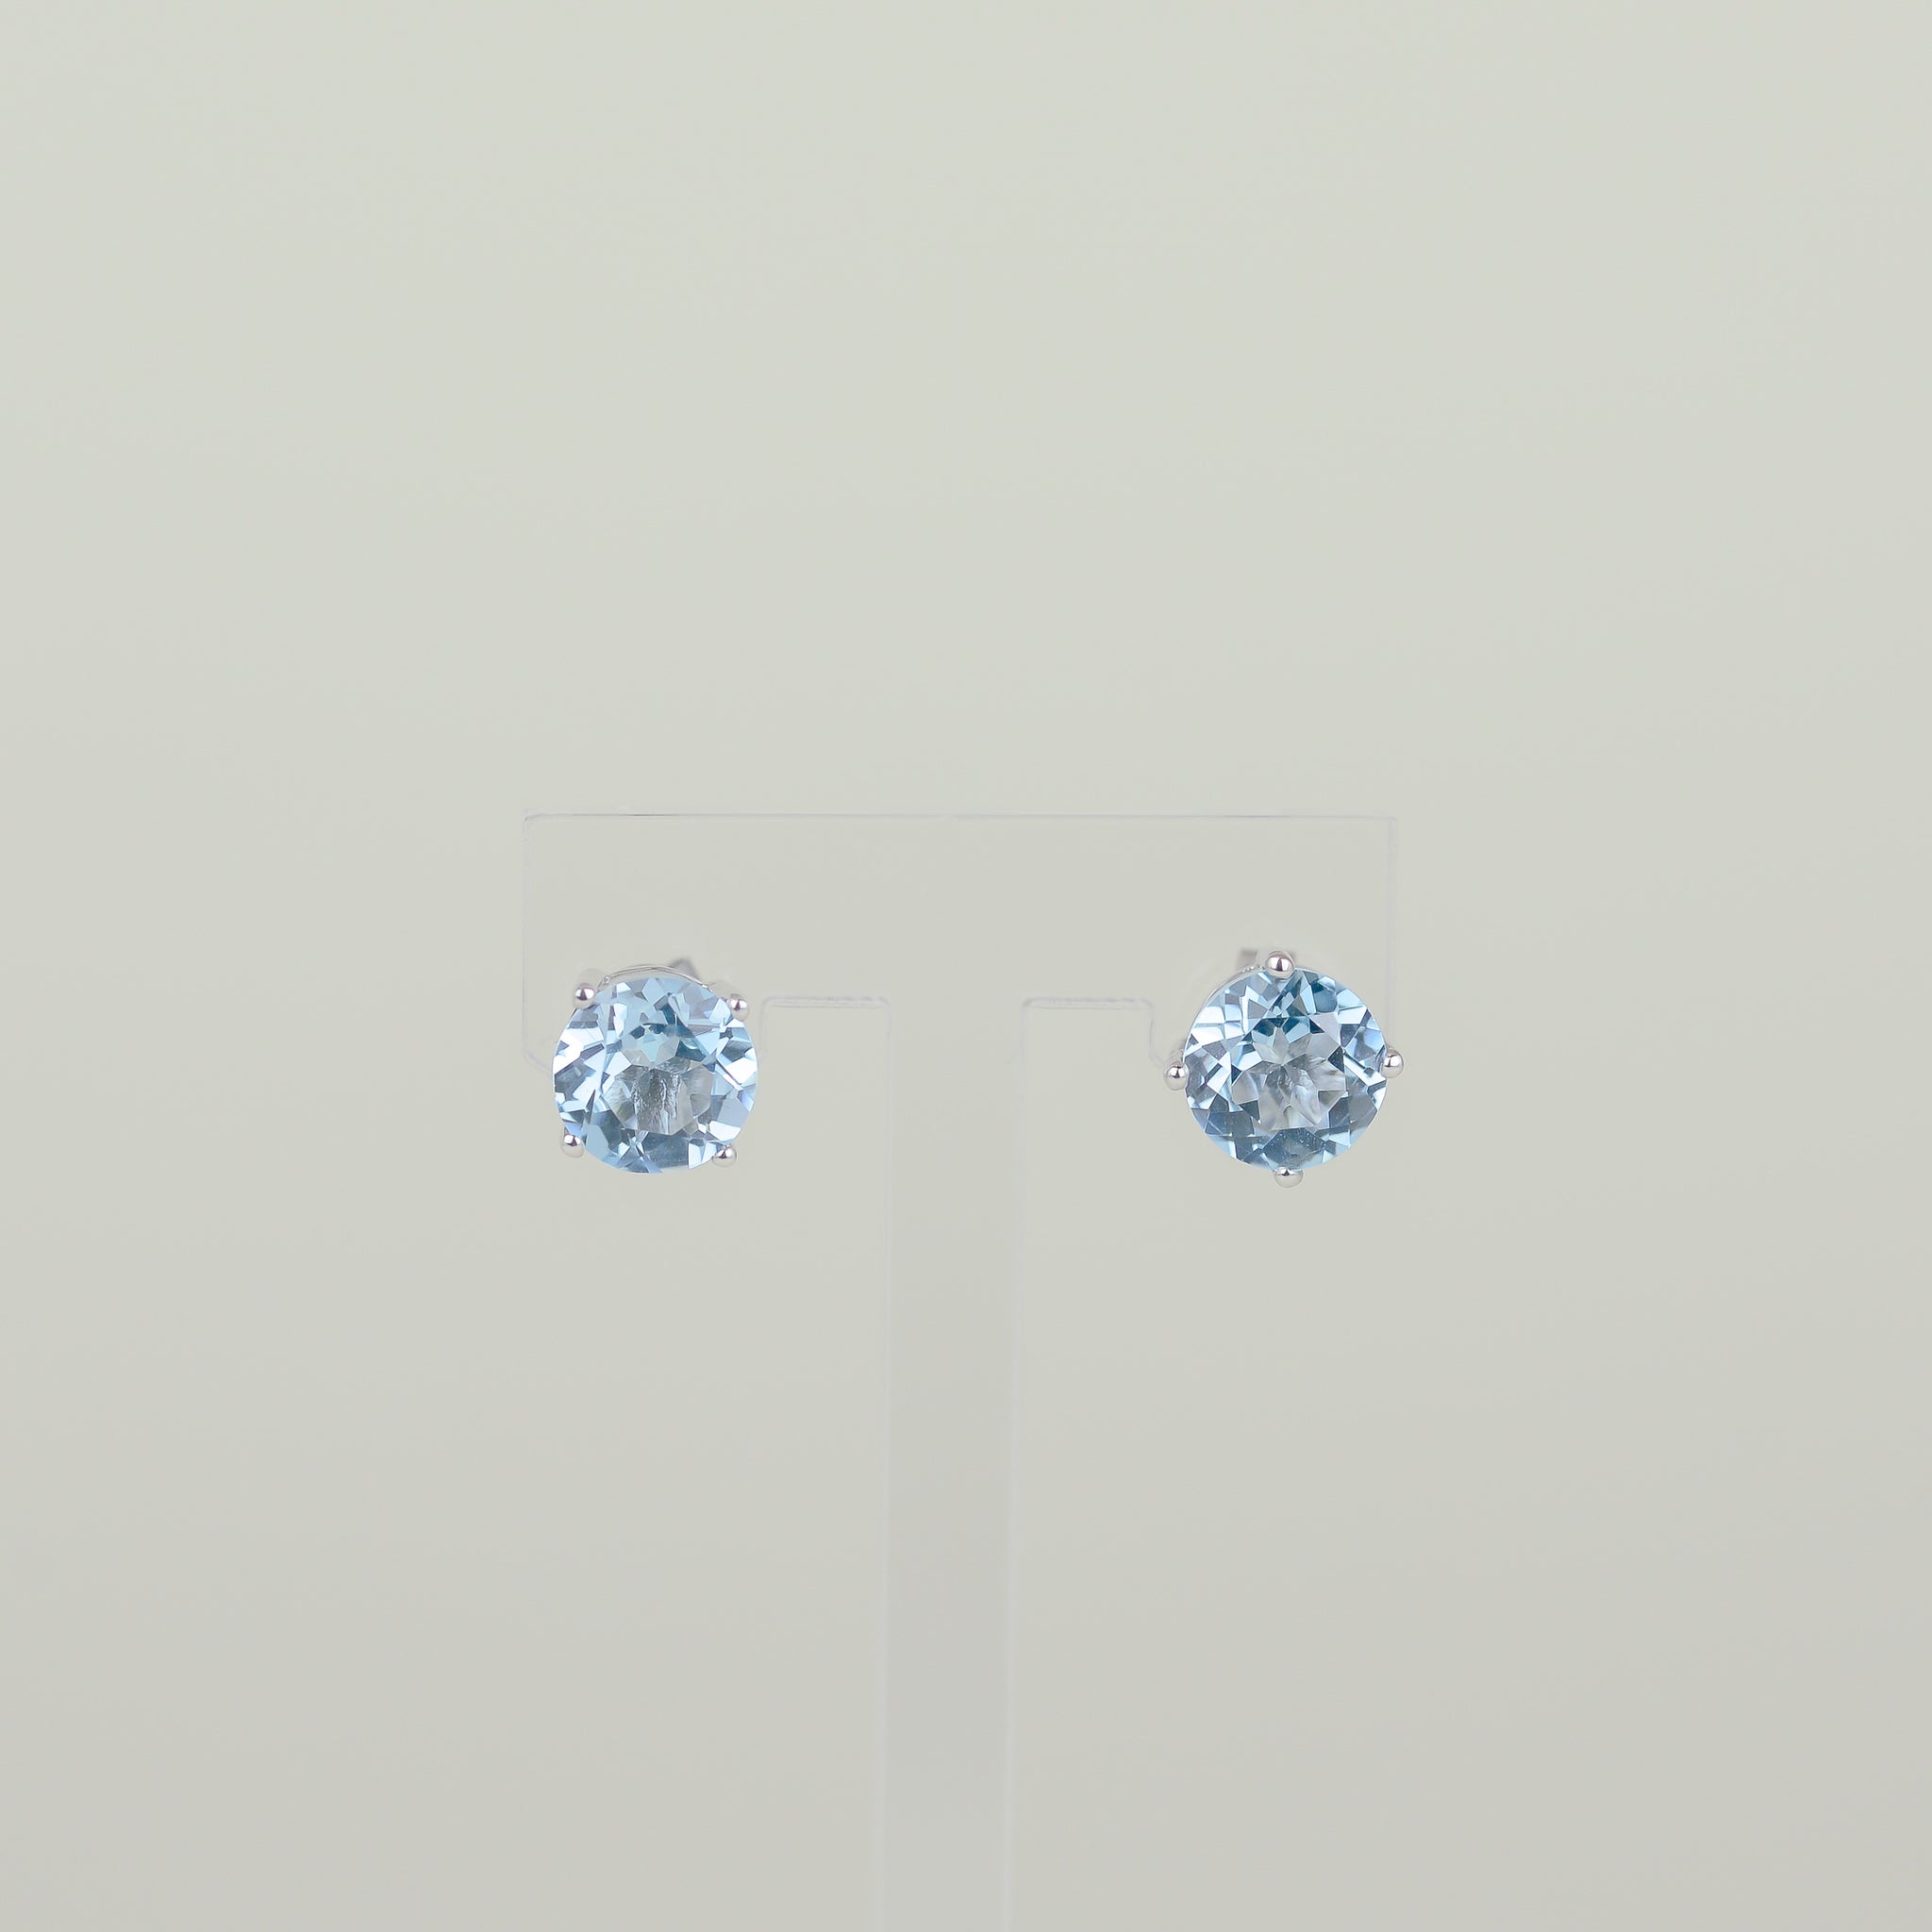 9ct White Gold 3.98ct Round Blue Topaz Earrings